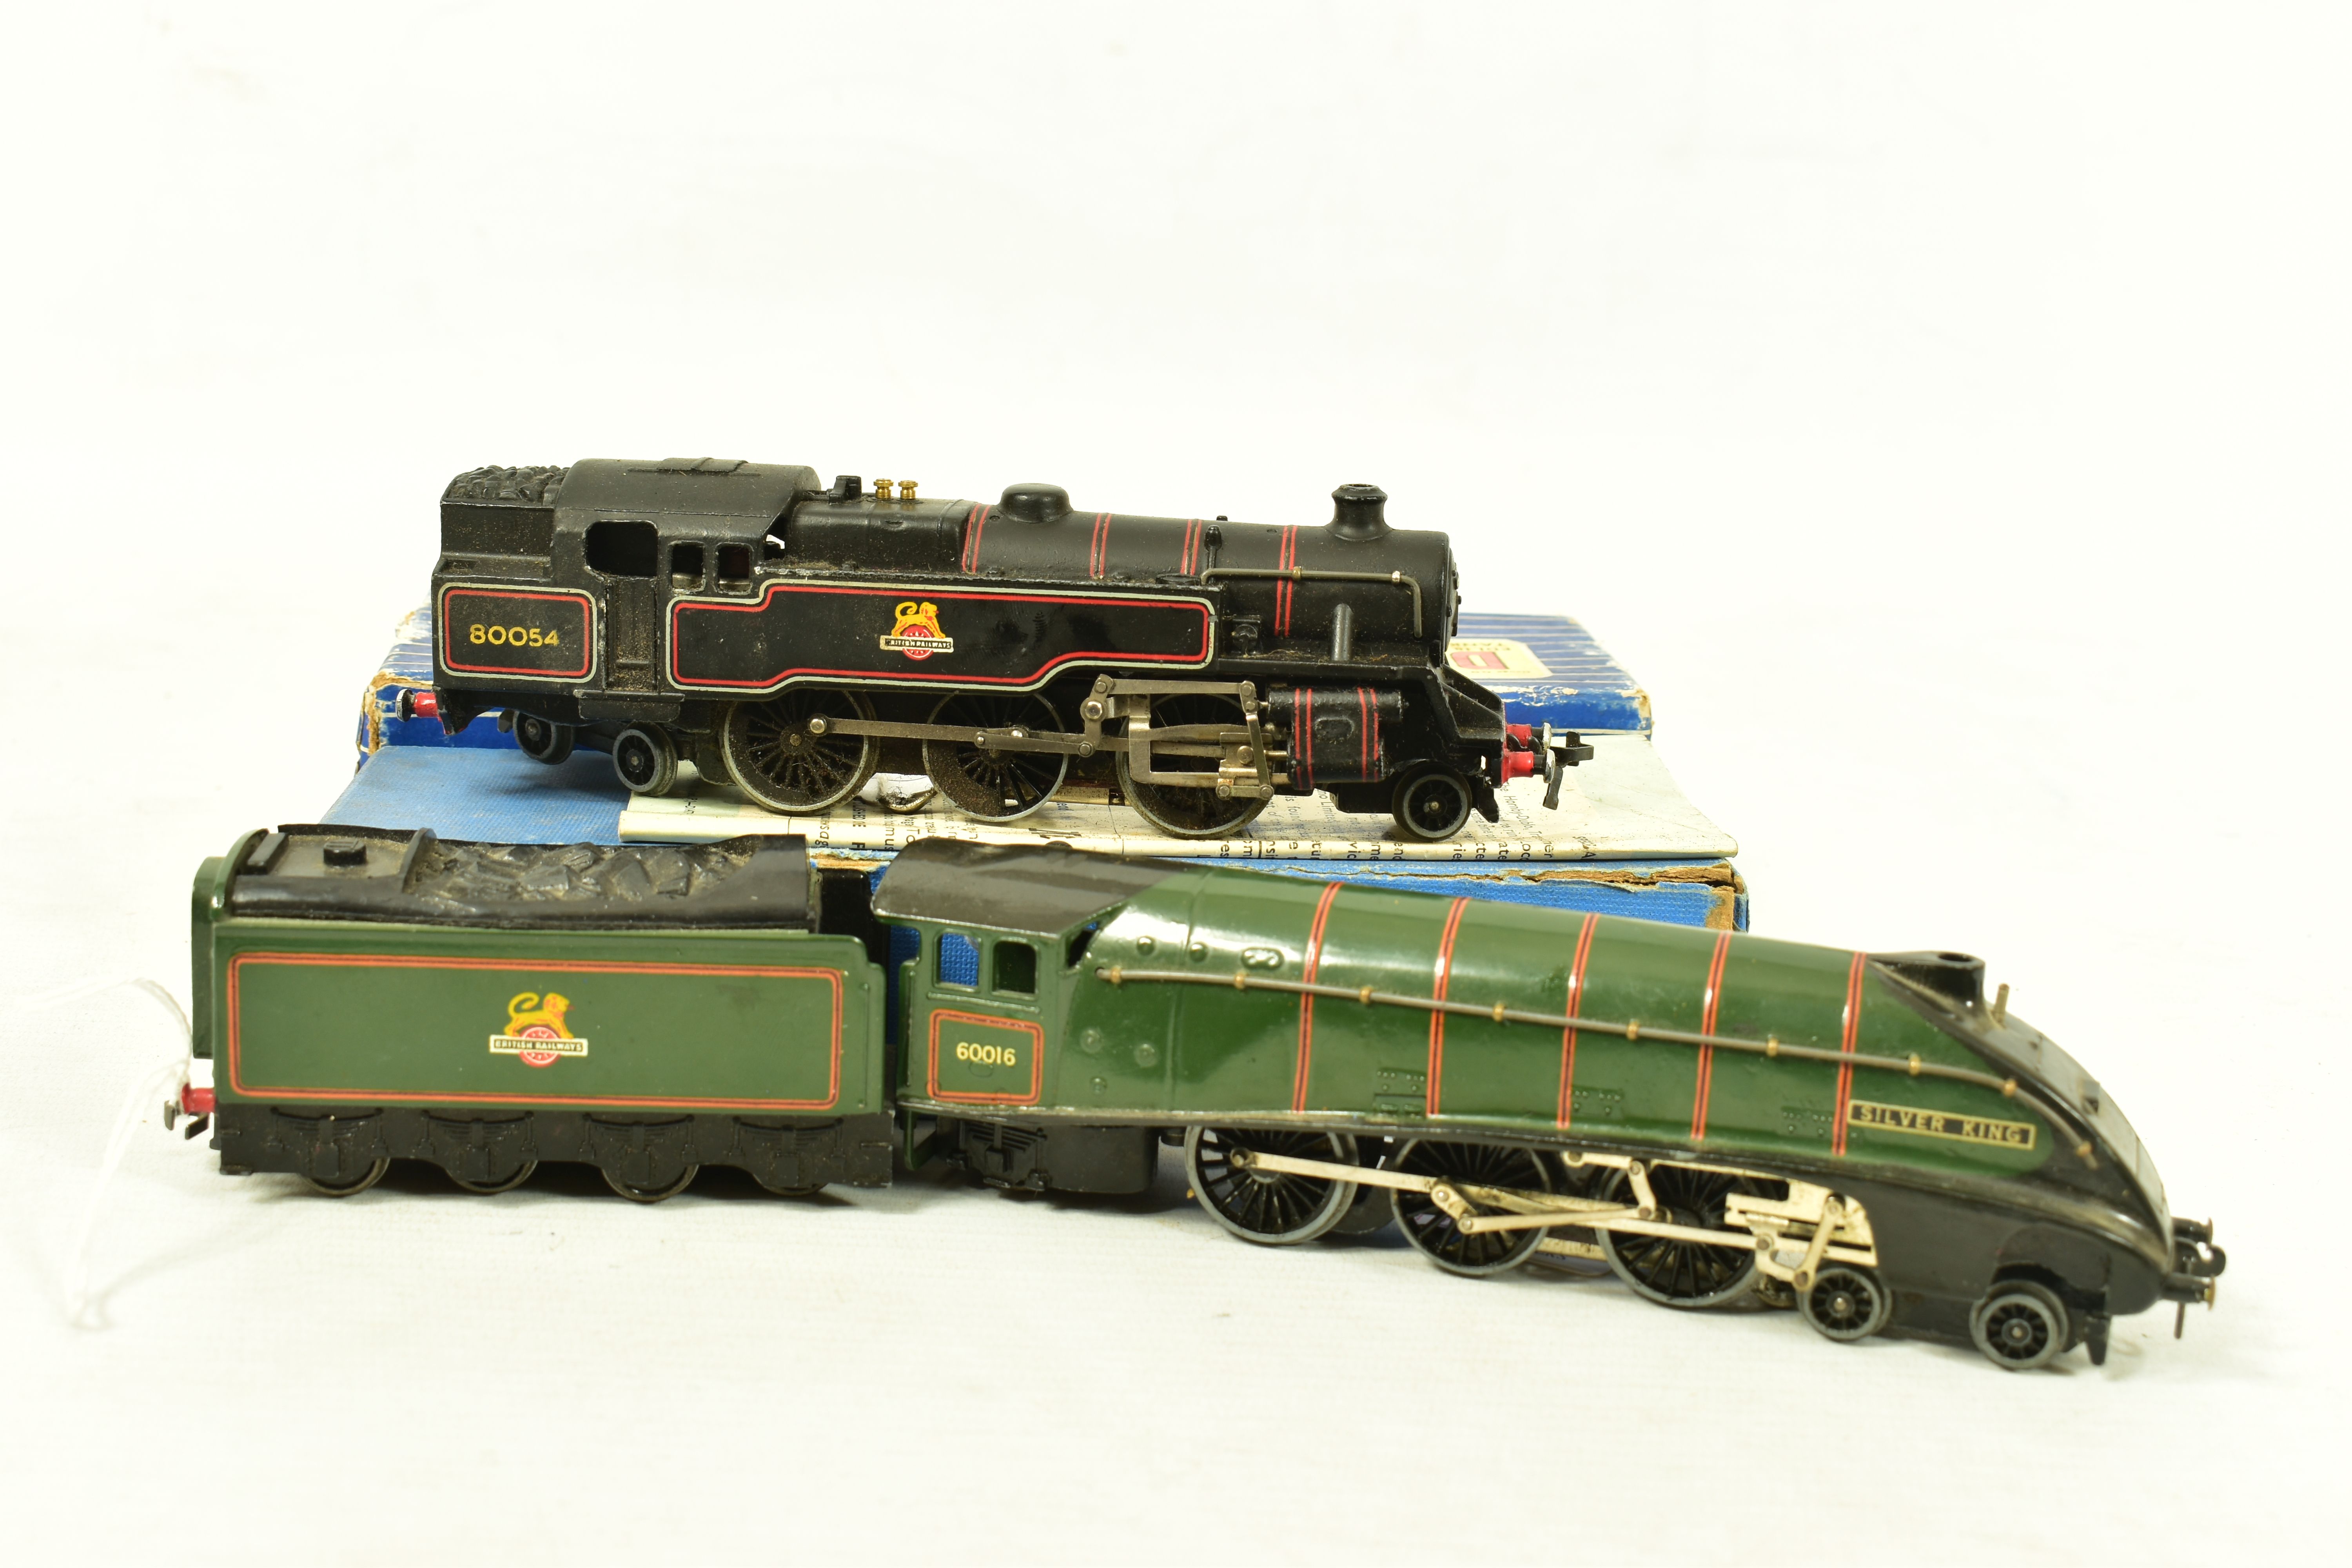 TWO BOXED HORNBY DUBLO LOCOMOTIVES, A4 class 'Silver King' No.60016, B.R. lined gloss green